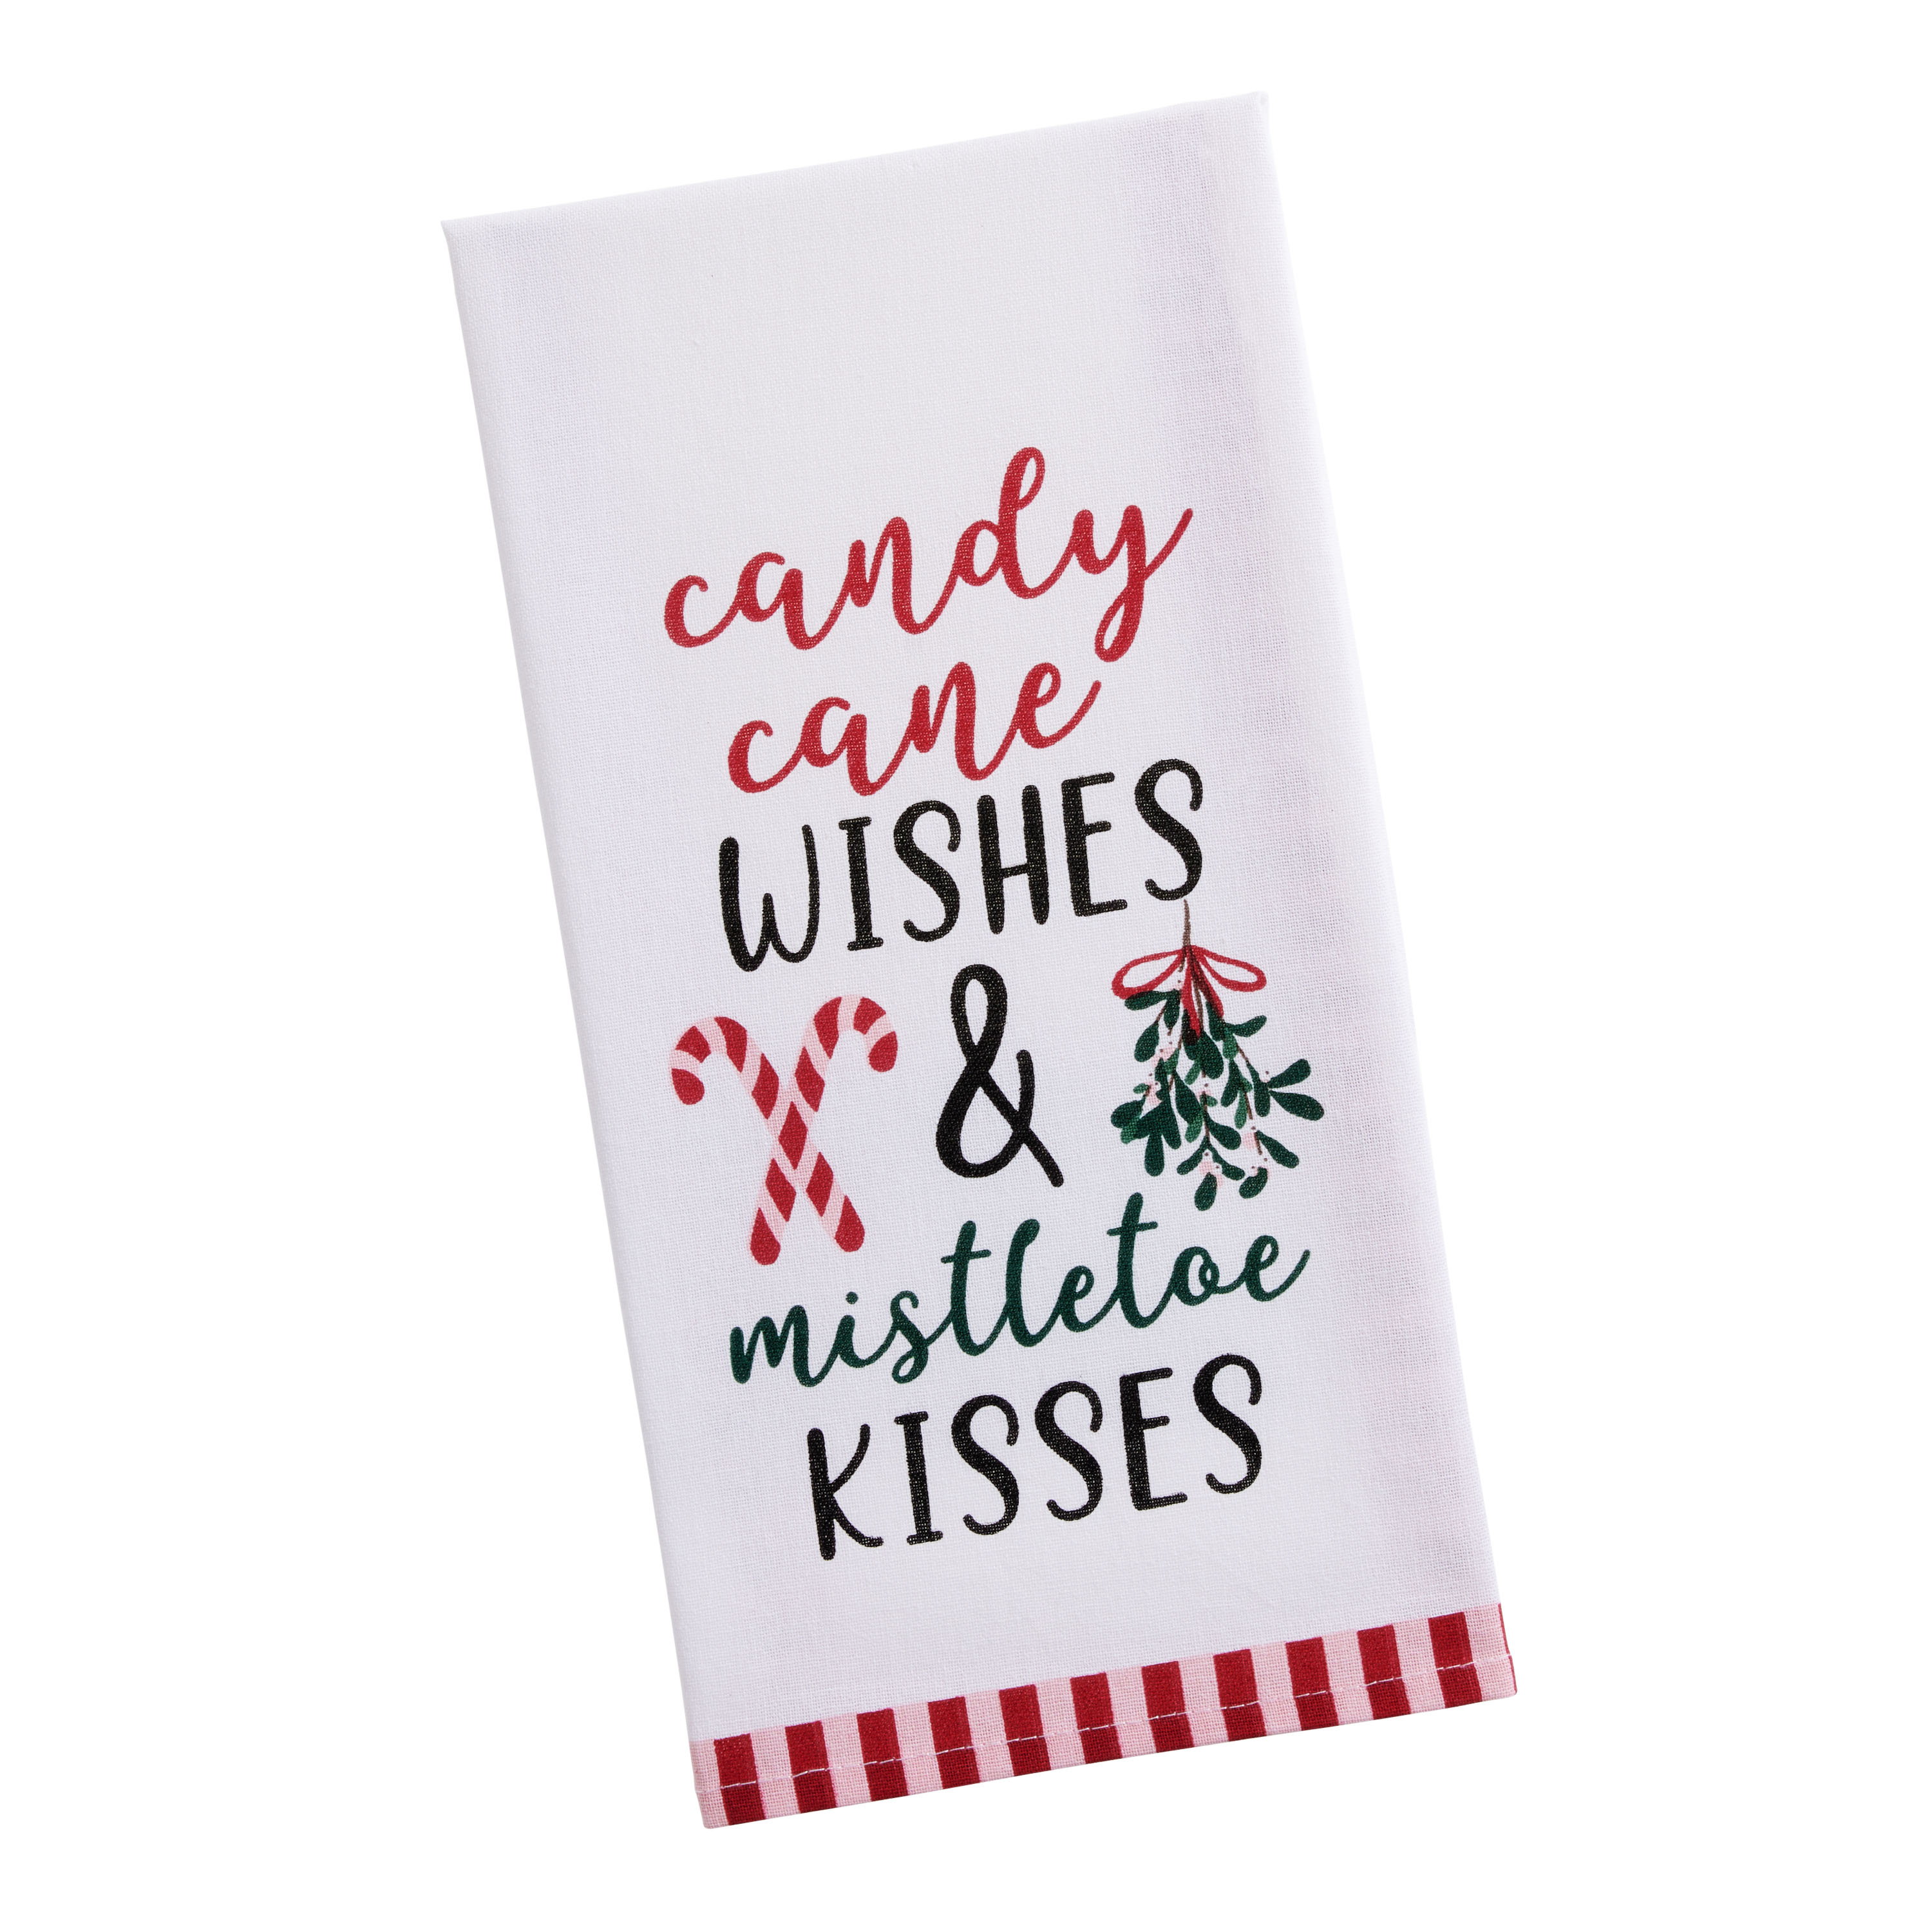 Merry Christmas Happy Holidays Kitchen Linen Set - Mistletoe Kisses & Candy  Cane Wishes - Includes 1 Oven Mitt, 1 Pot Holder, 2 Kitchen Towels Dish